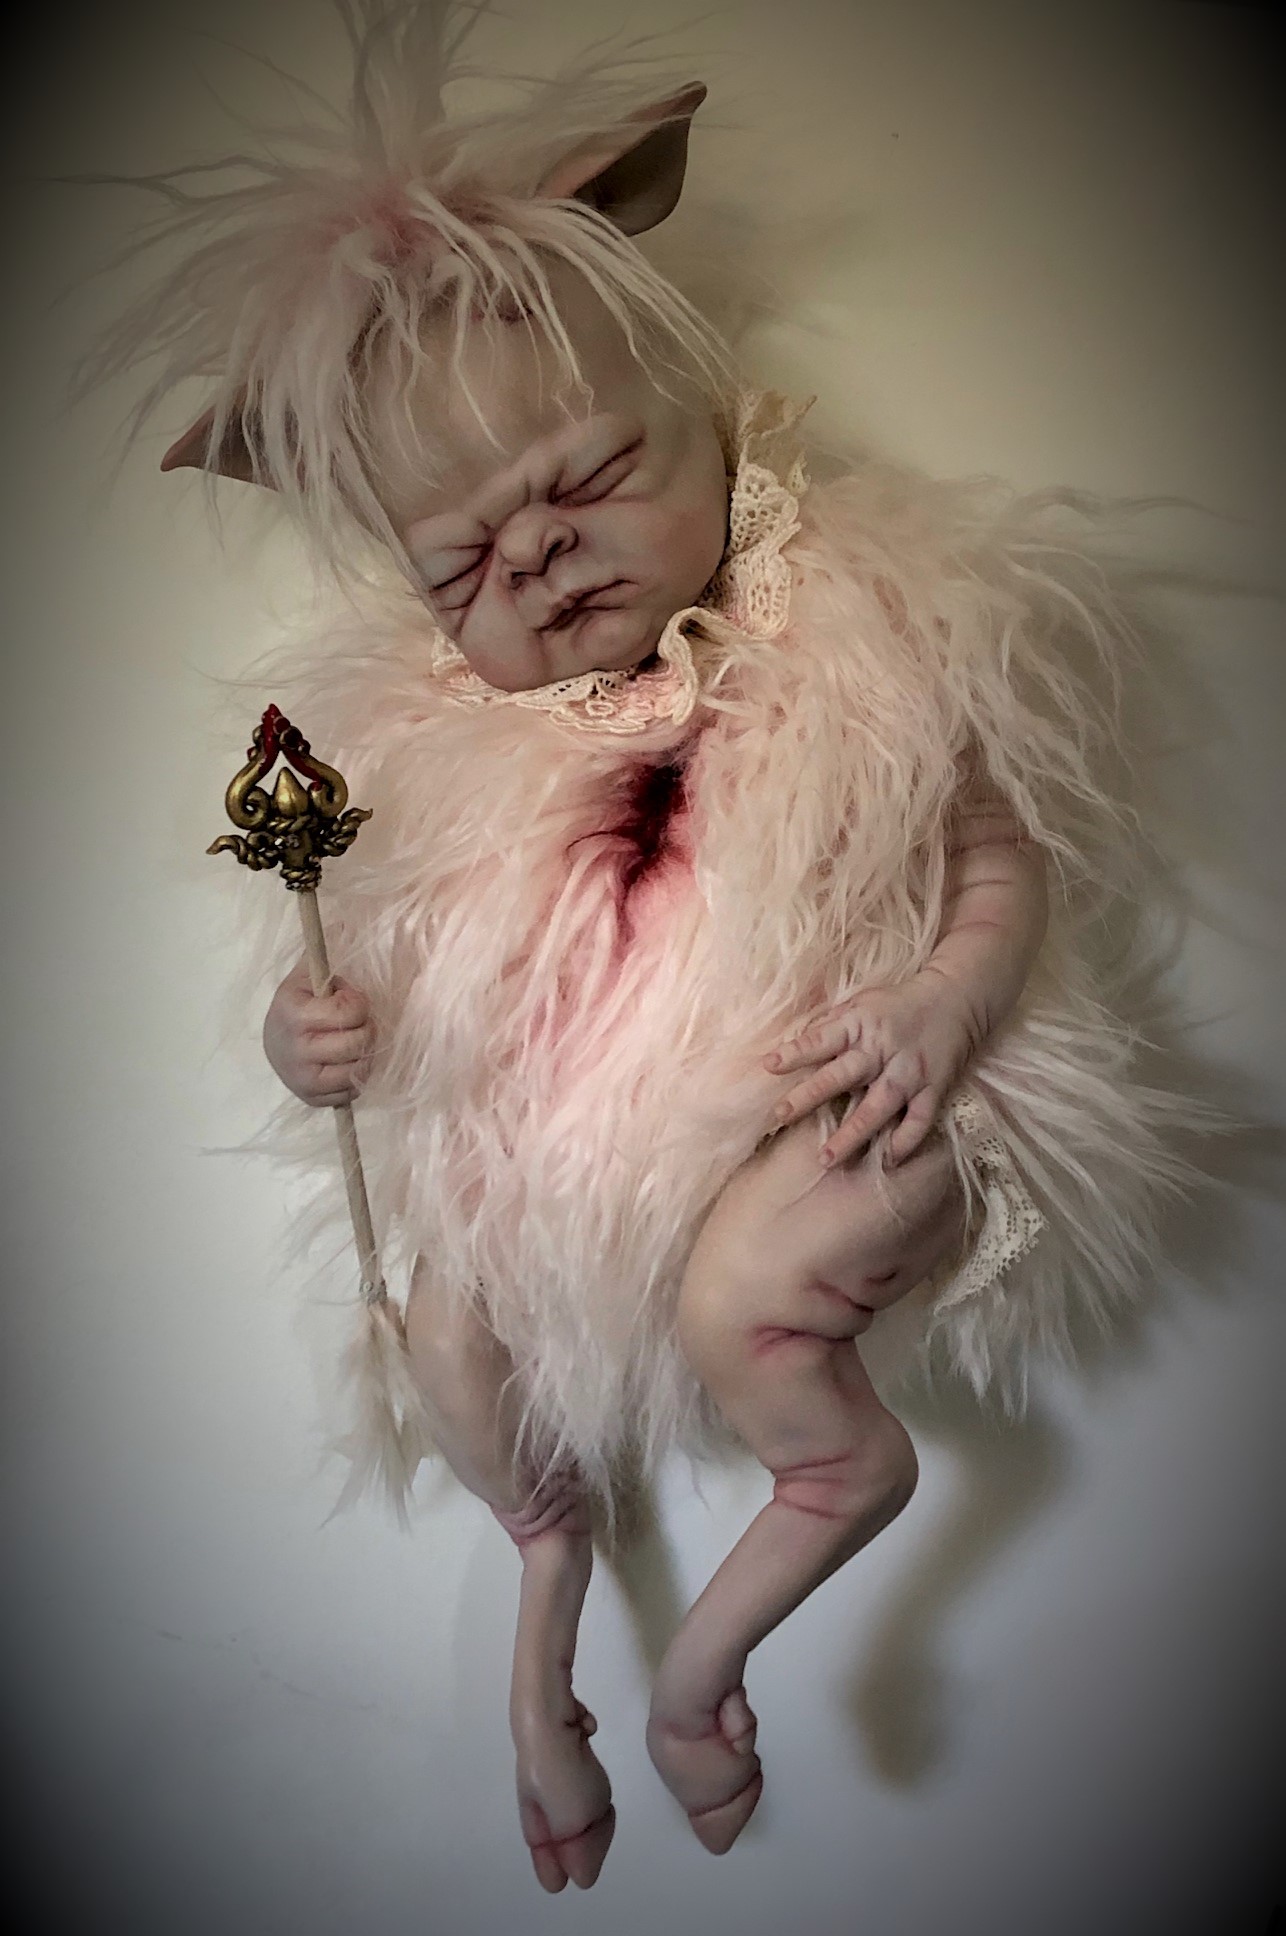 mixed media artdoll hybrid lamb babydoll with hand-painted vinyl head light pink faux fur, lamb legs, baby clutches the arrow that mortally wounded her bloody chest